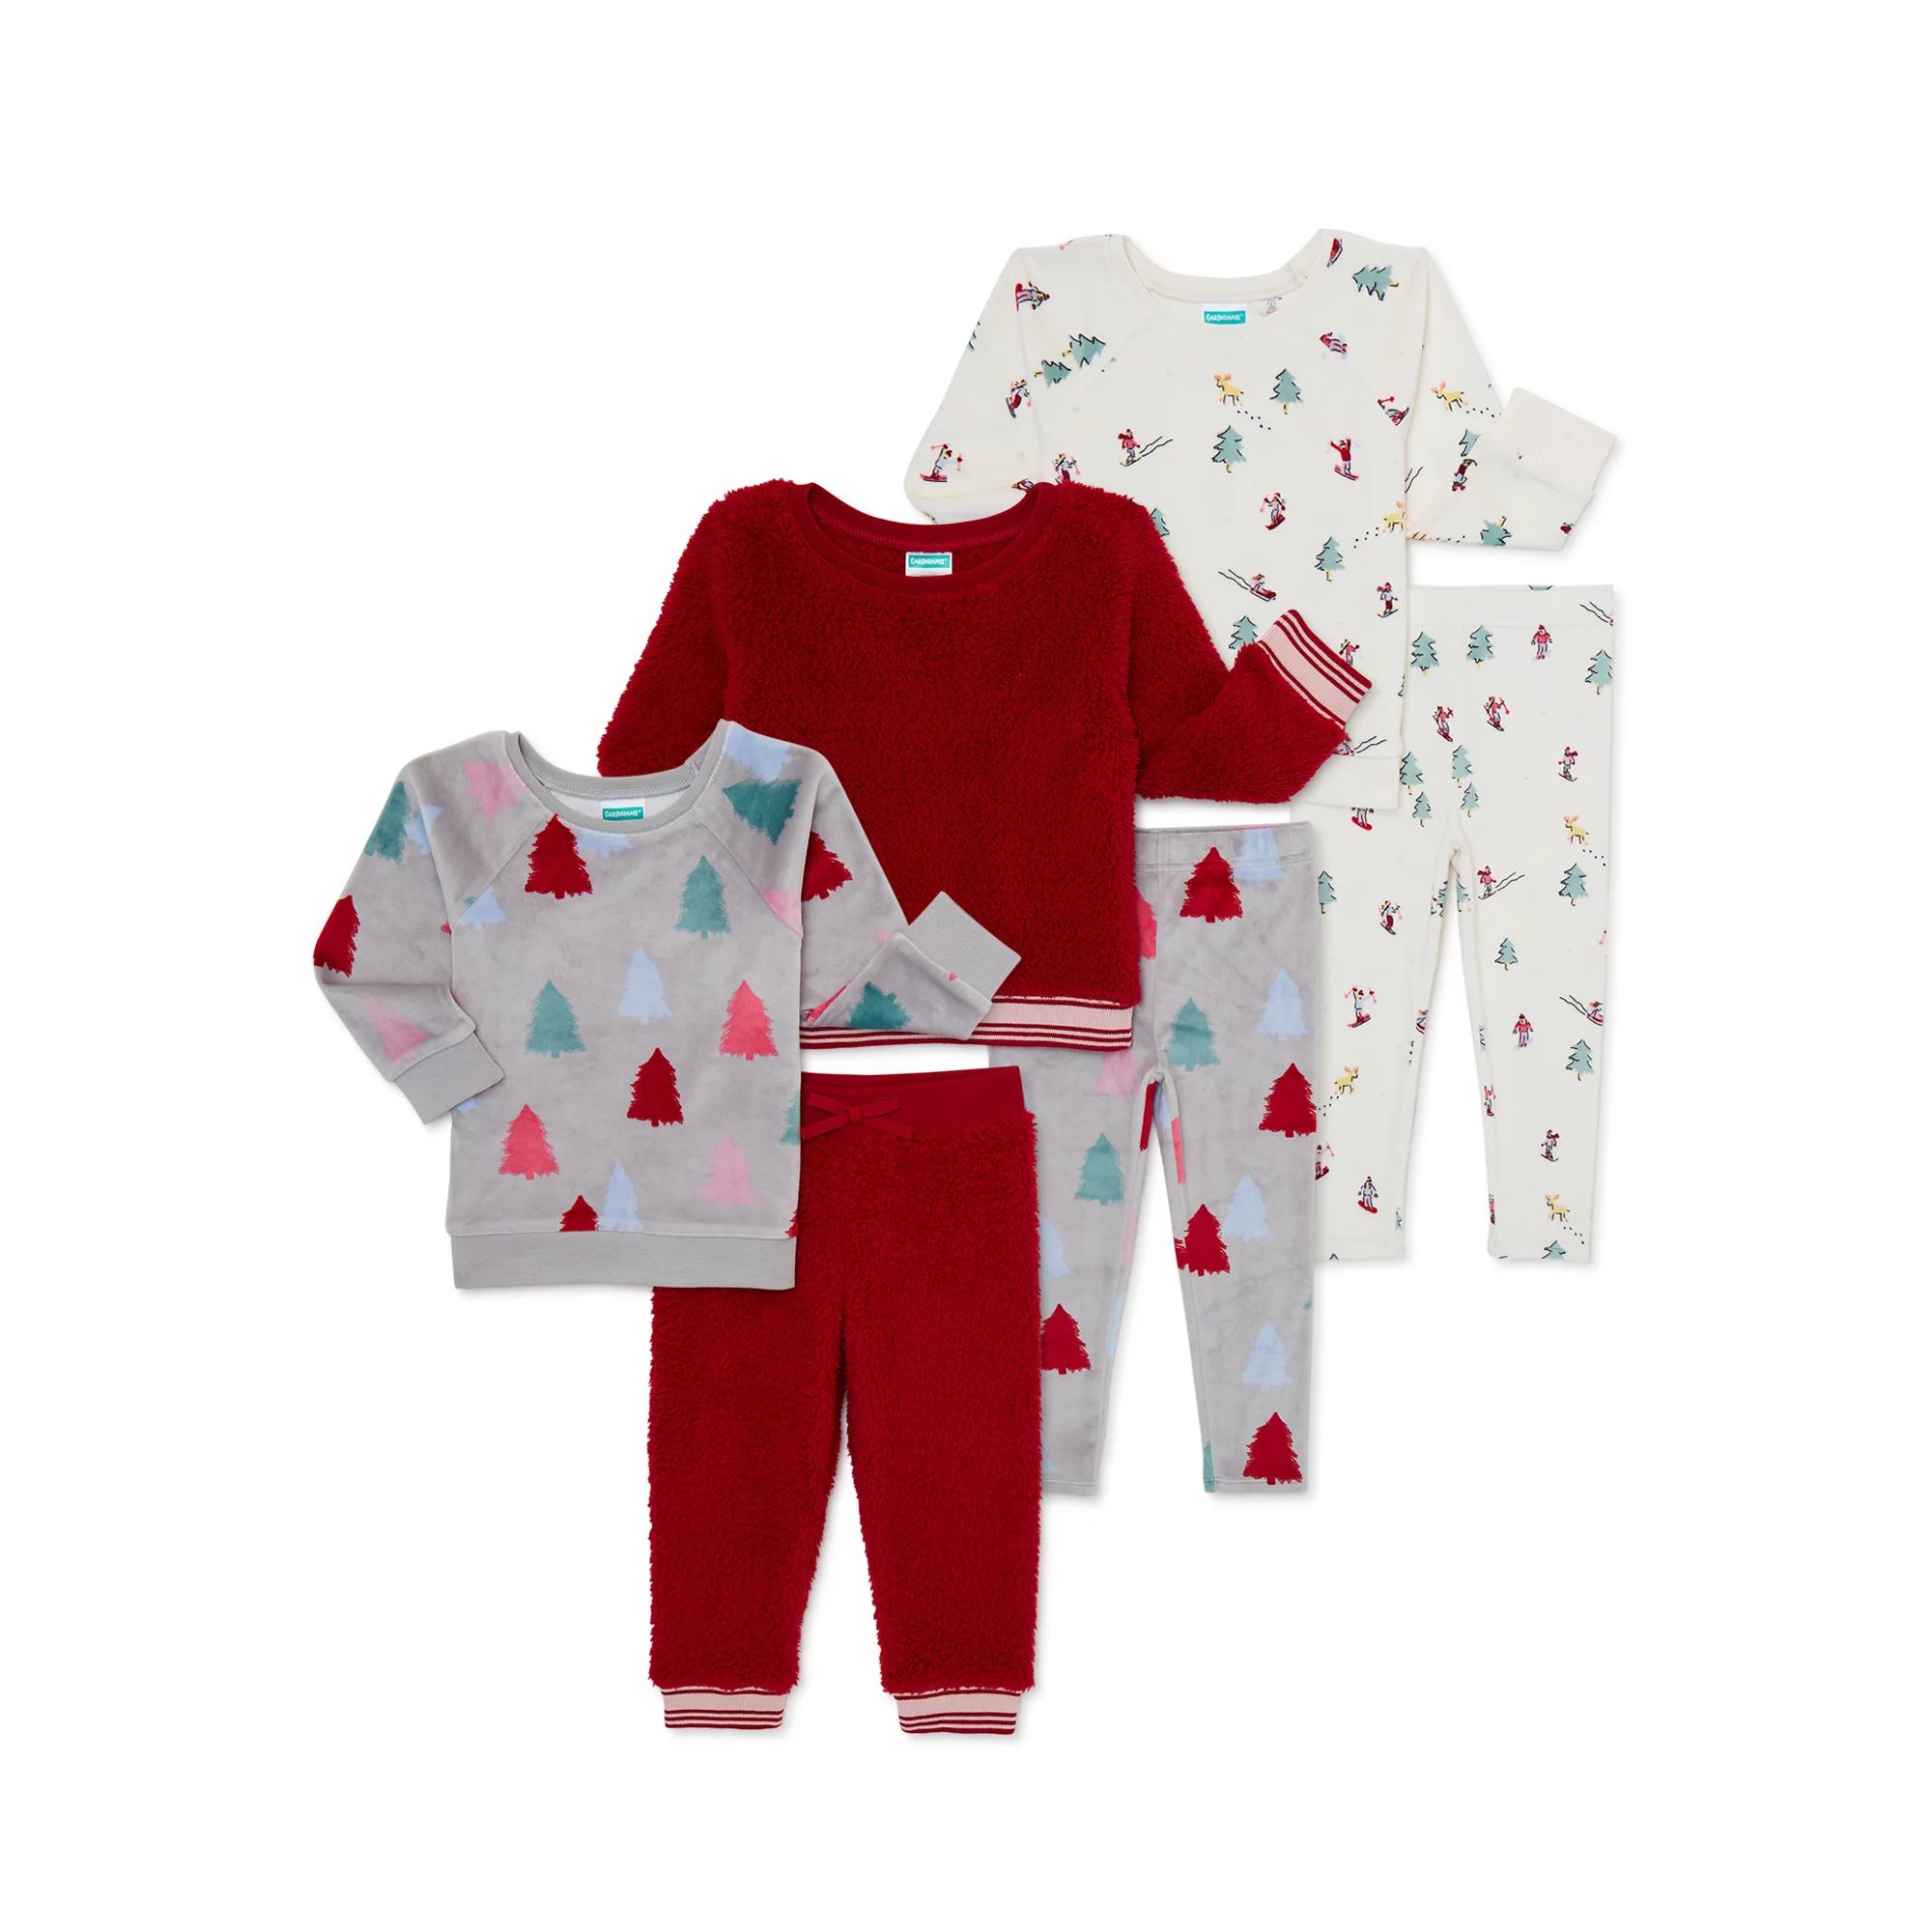 Garanimals Baby and Toddler Girls’ Mix and Match Outfits Kid Pack, 6-Piece, Sizes 12 Months-5T | Walmart (US)